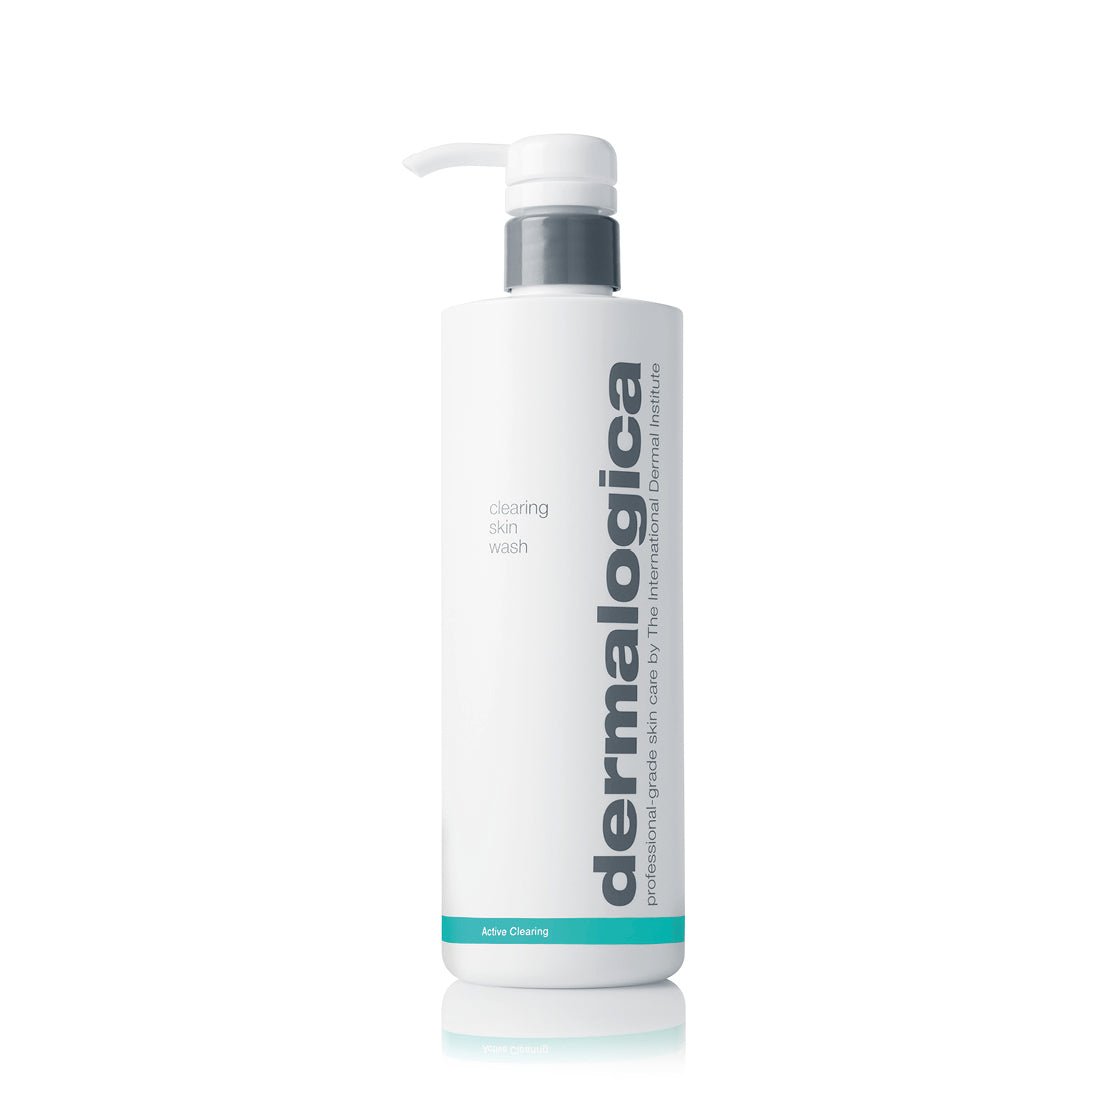 Dermalogica Clearing Skin Wash - Heaven Therapy Skincare (7156821917856)